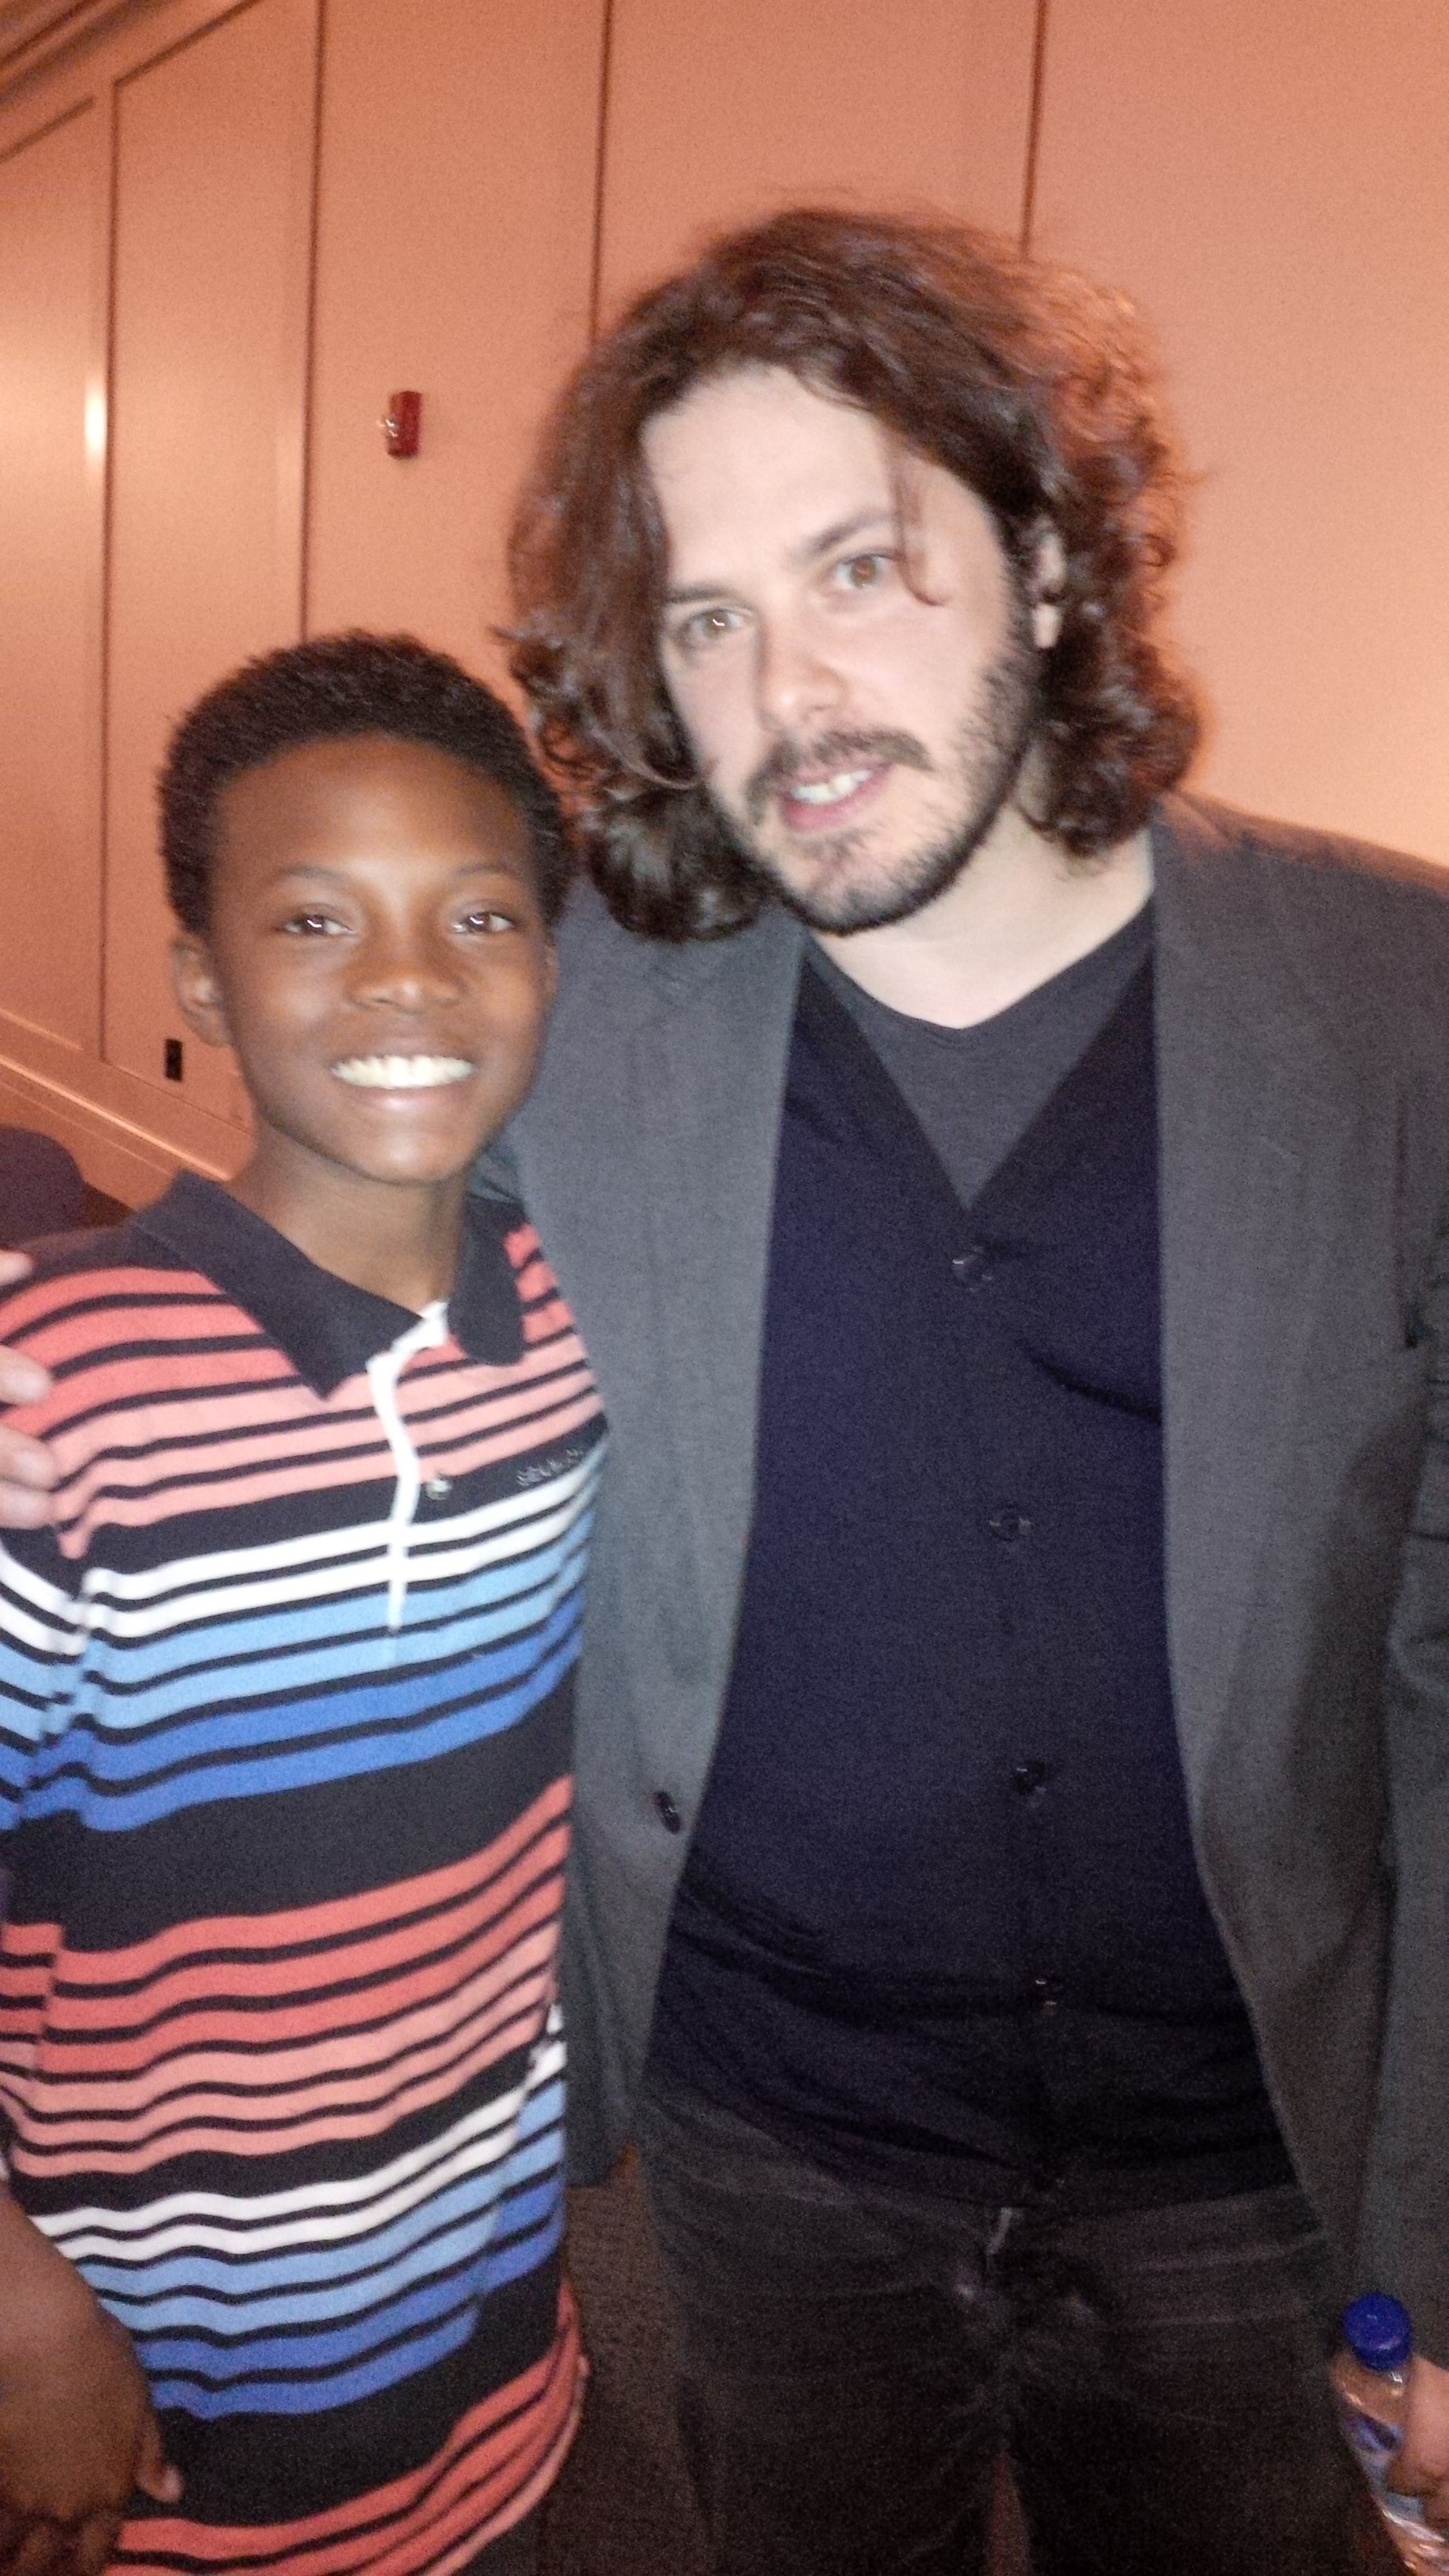 Justice Winter and Director Edgar Wright at the Hampton International Film Festival